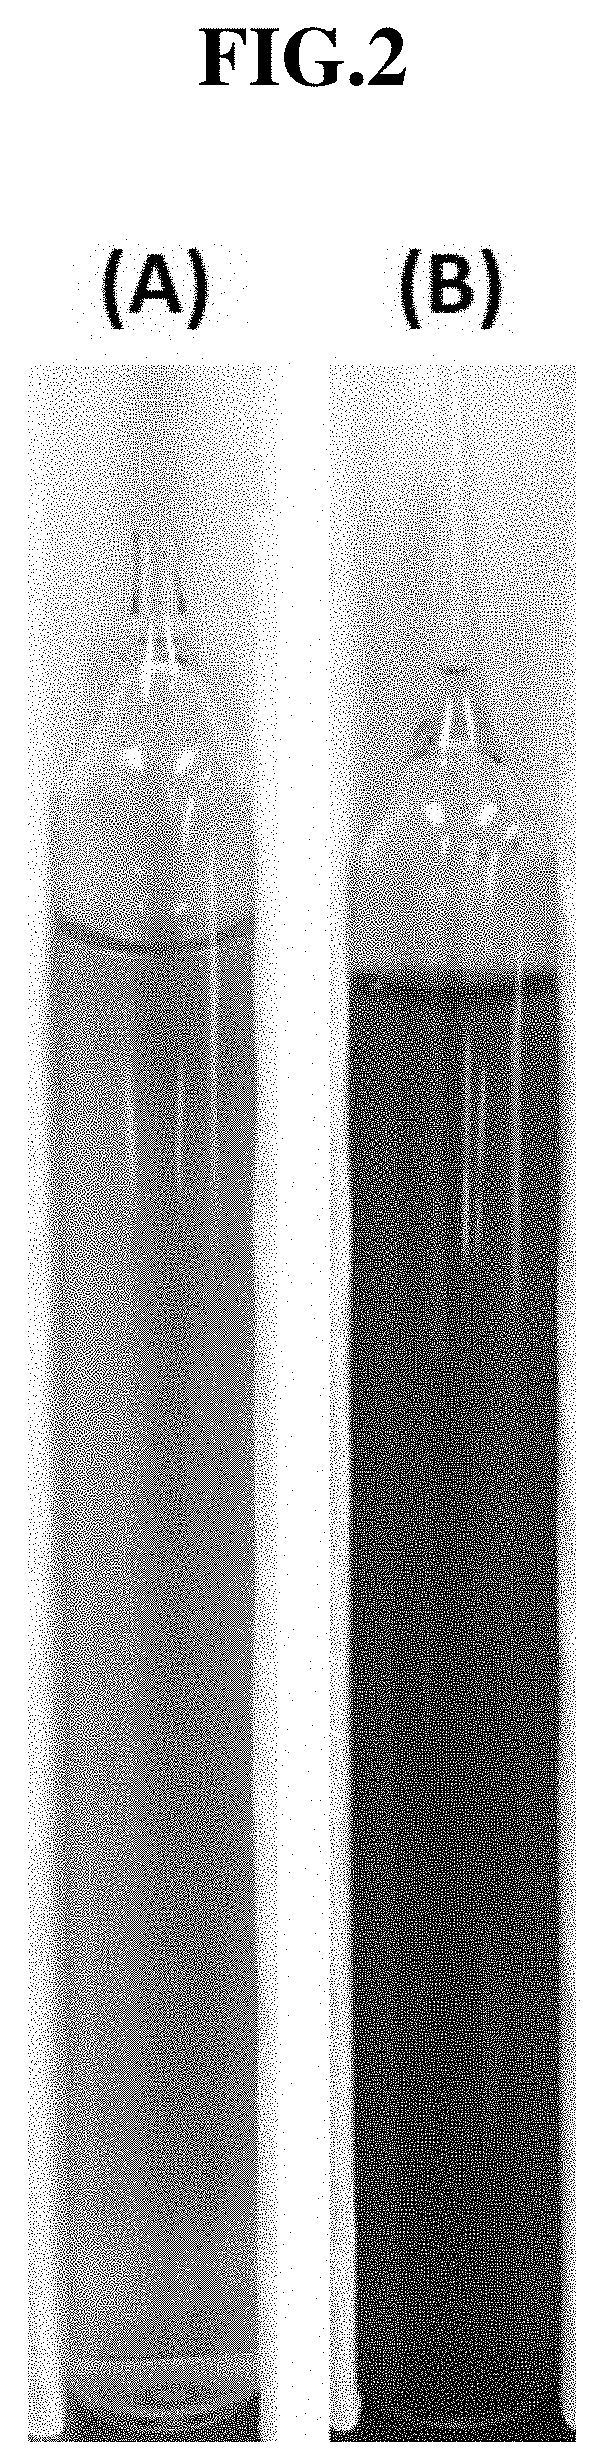 Spectrometer compatible vacuum ampoule detection system for rapidly diagnosing and quantifying viable bacteria in liquid samples